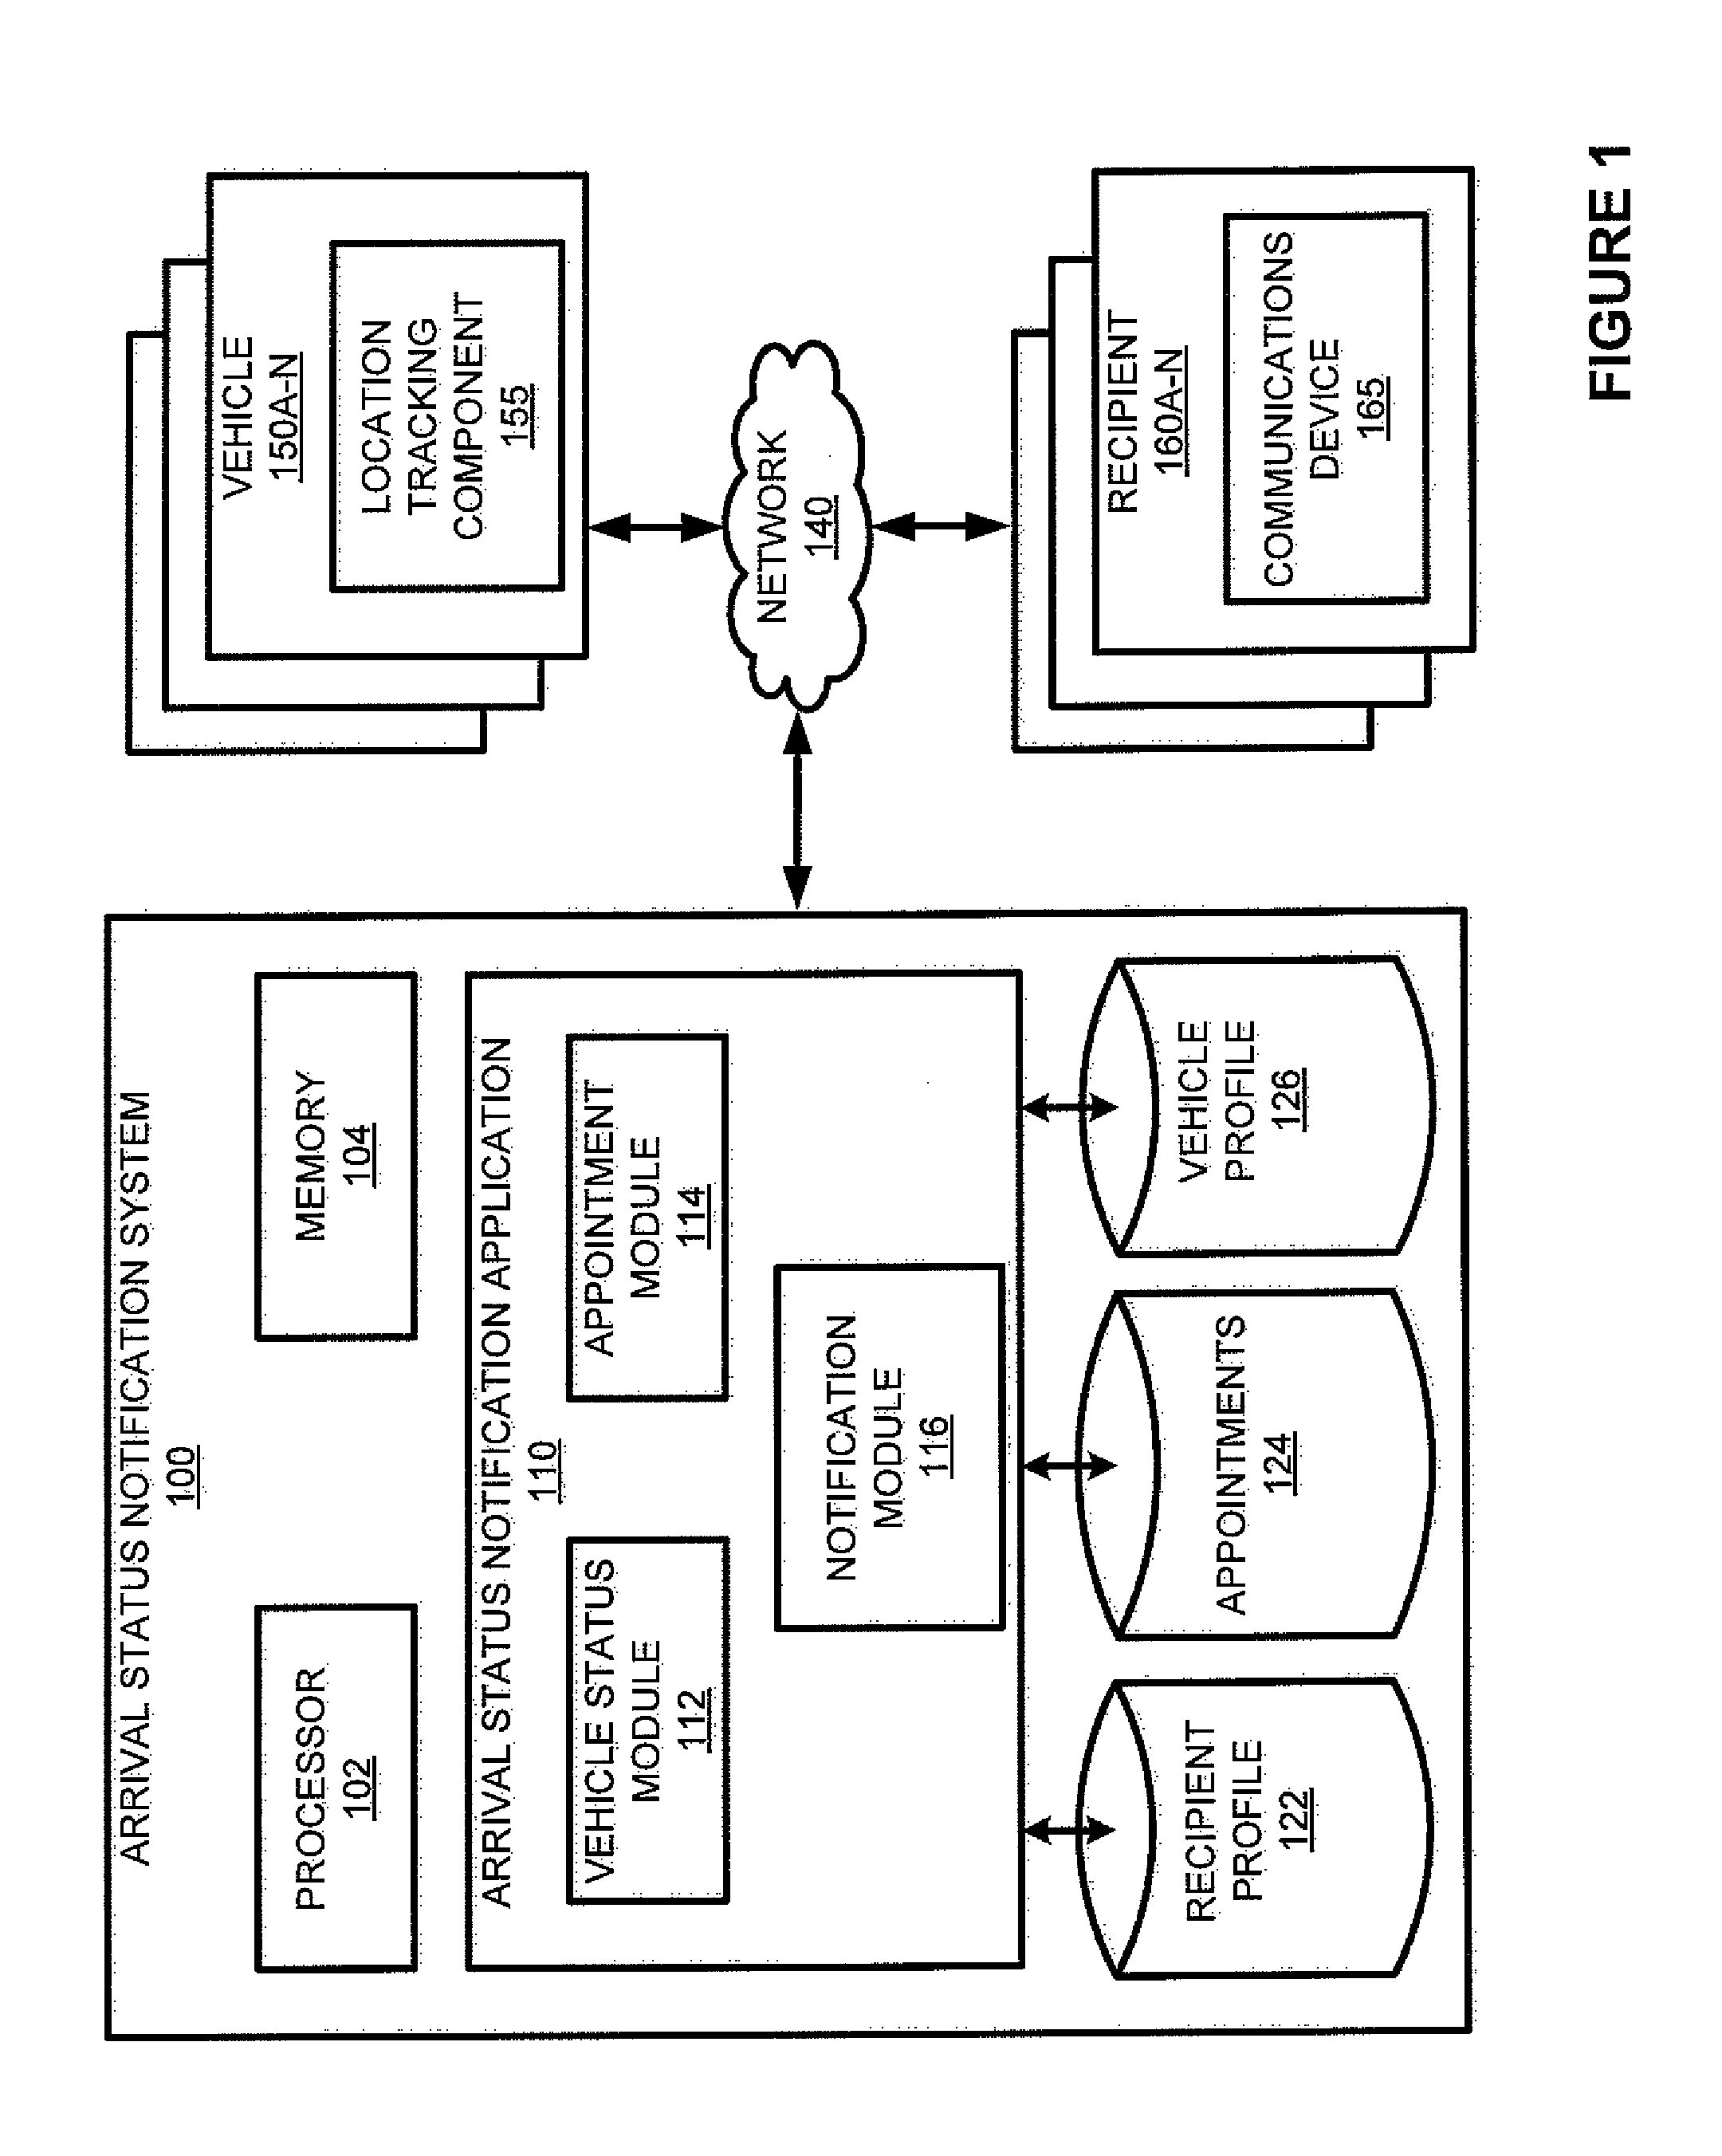 System and method of sending notifications prior to service arrival